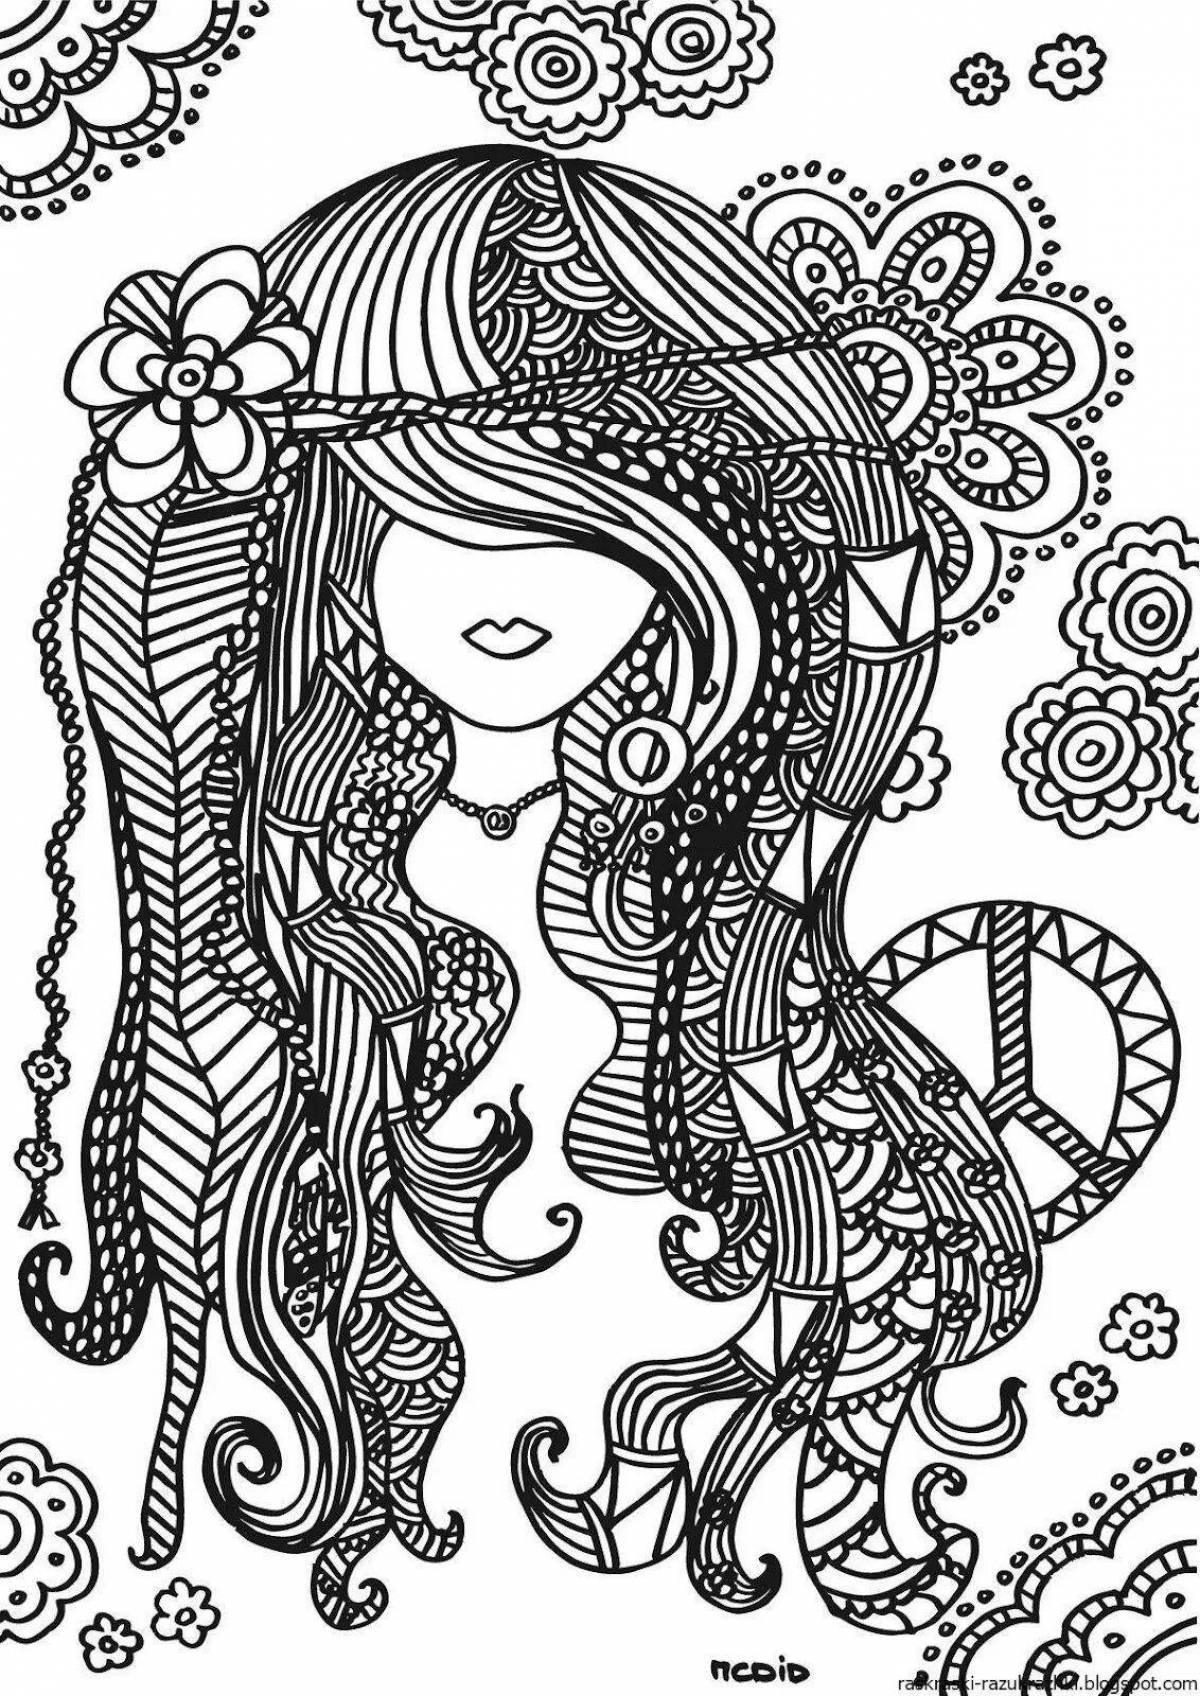 Fairytale antistress coloring book for girls 13 years old